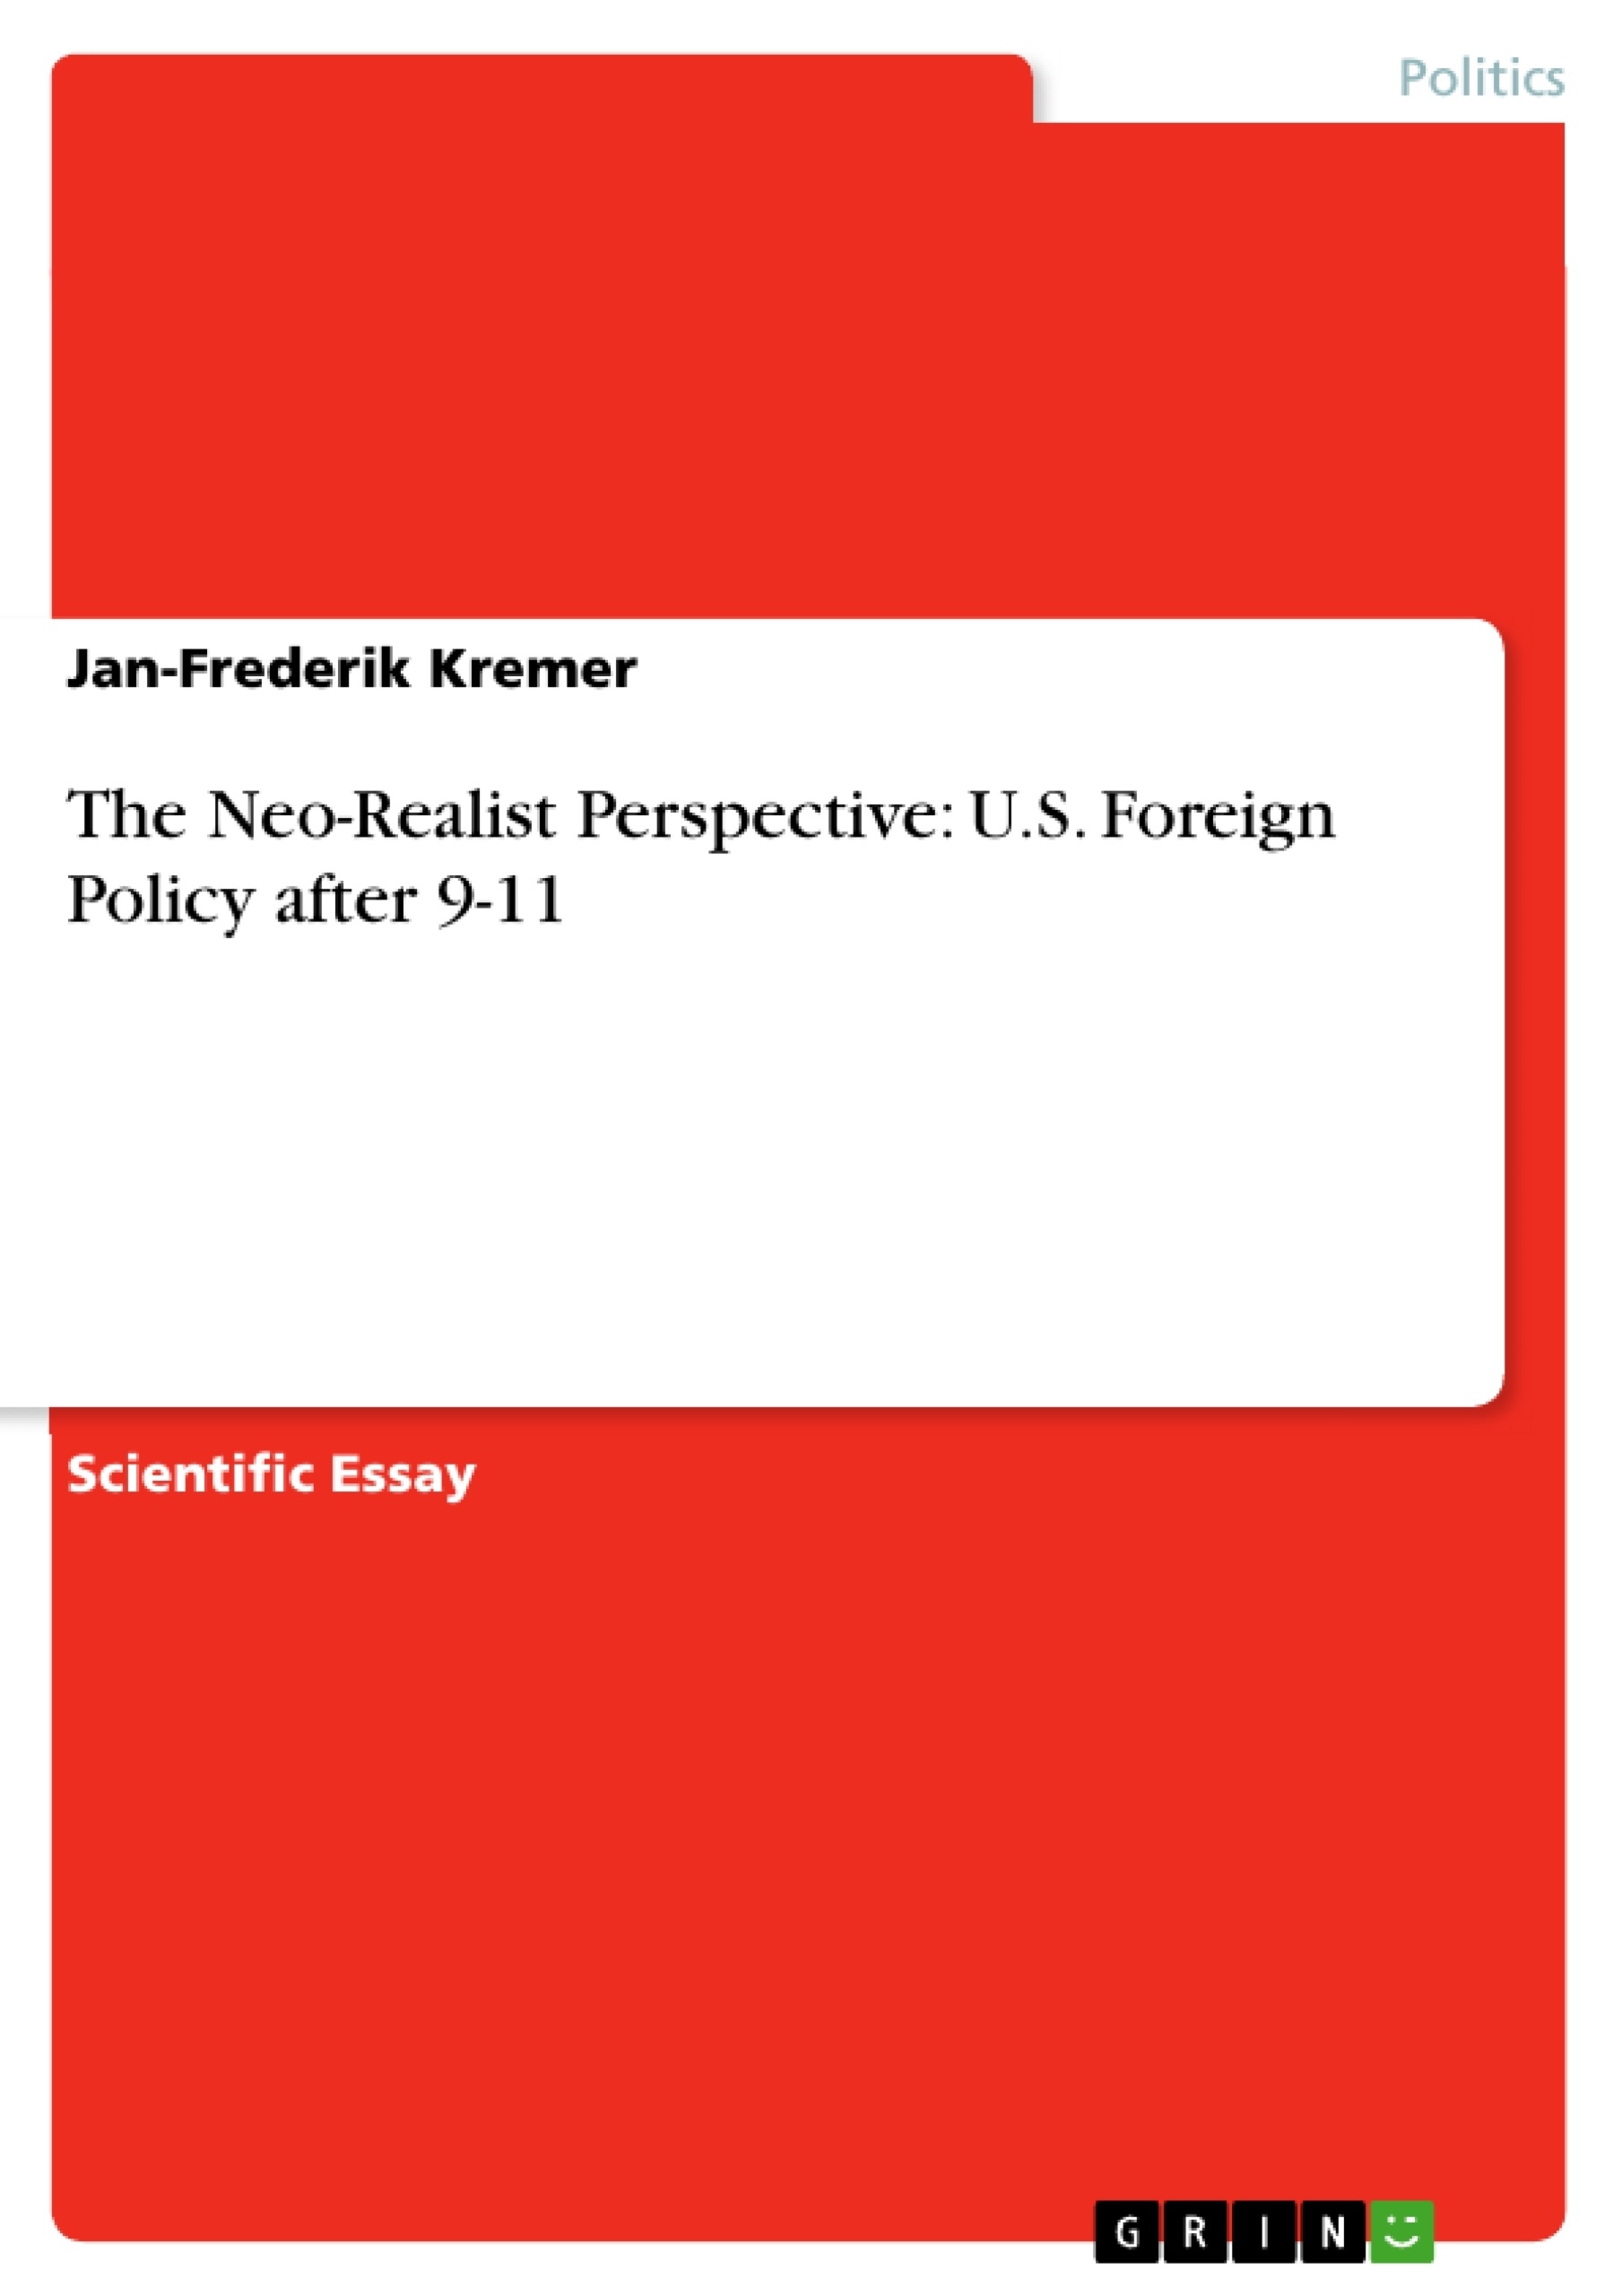 Title: The Neo-Realist Perspective: U.S. Foreign Policy after 9-11